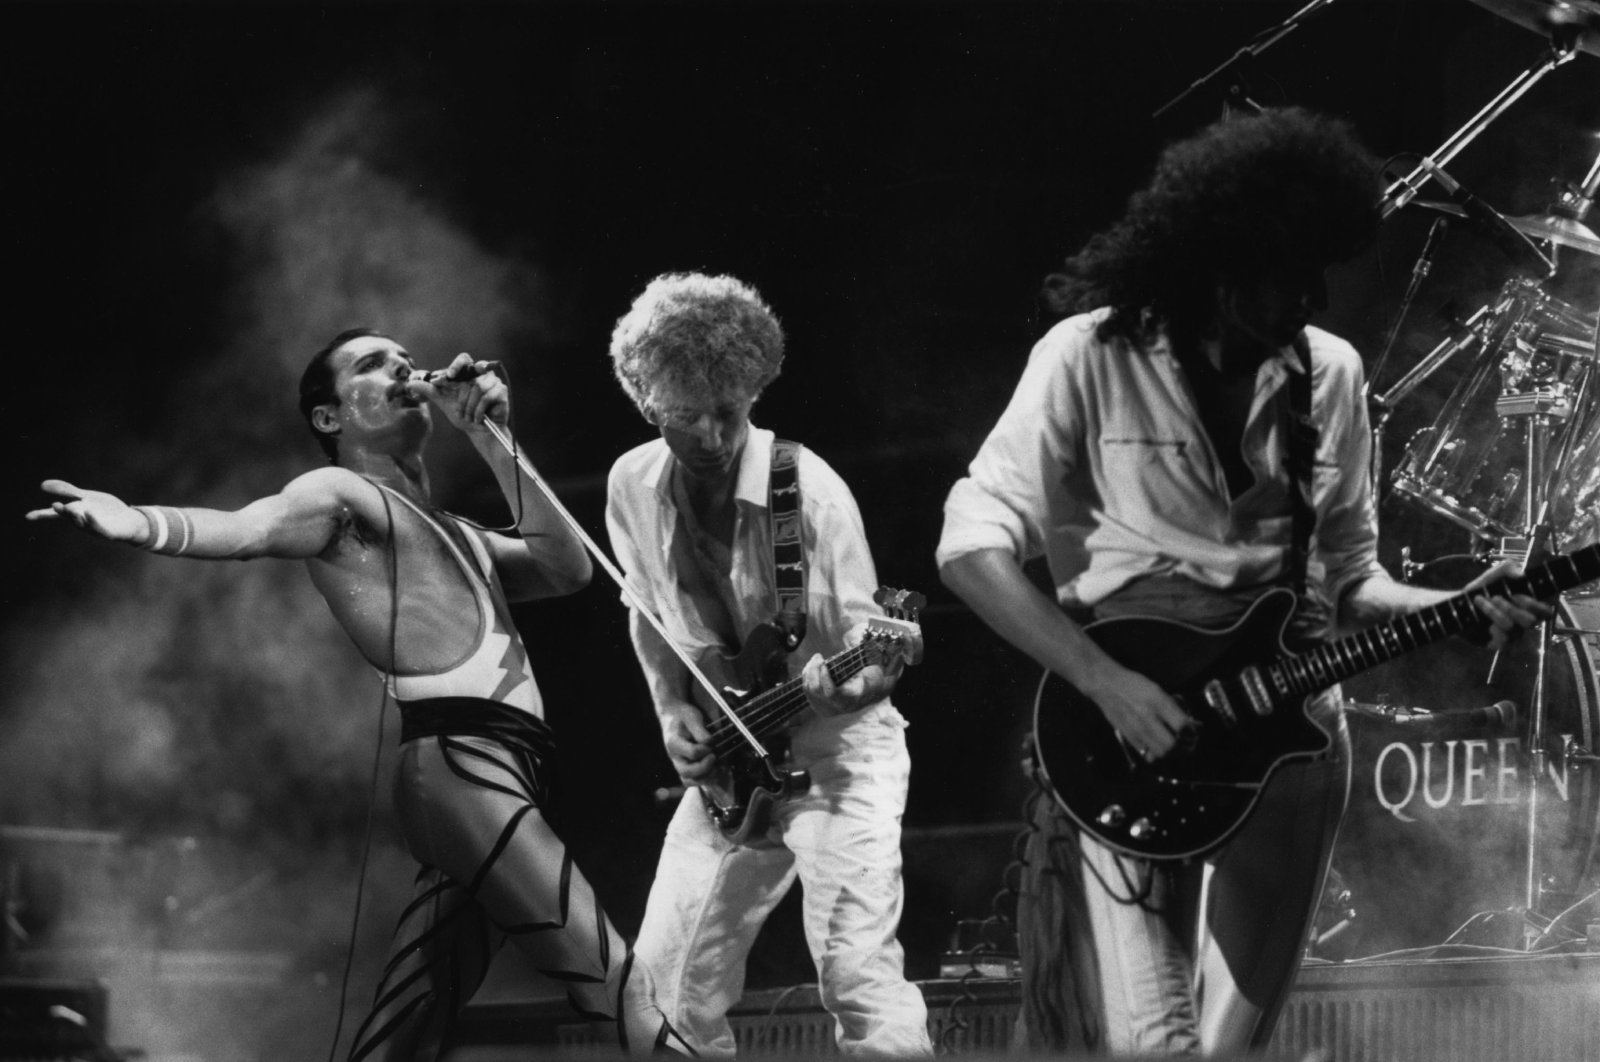 British rock group Queen in concert, from left to right, Freddie Mercury, John Deacon and Brian May. (Getty Images Photo)